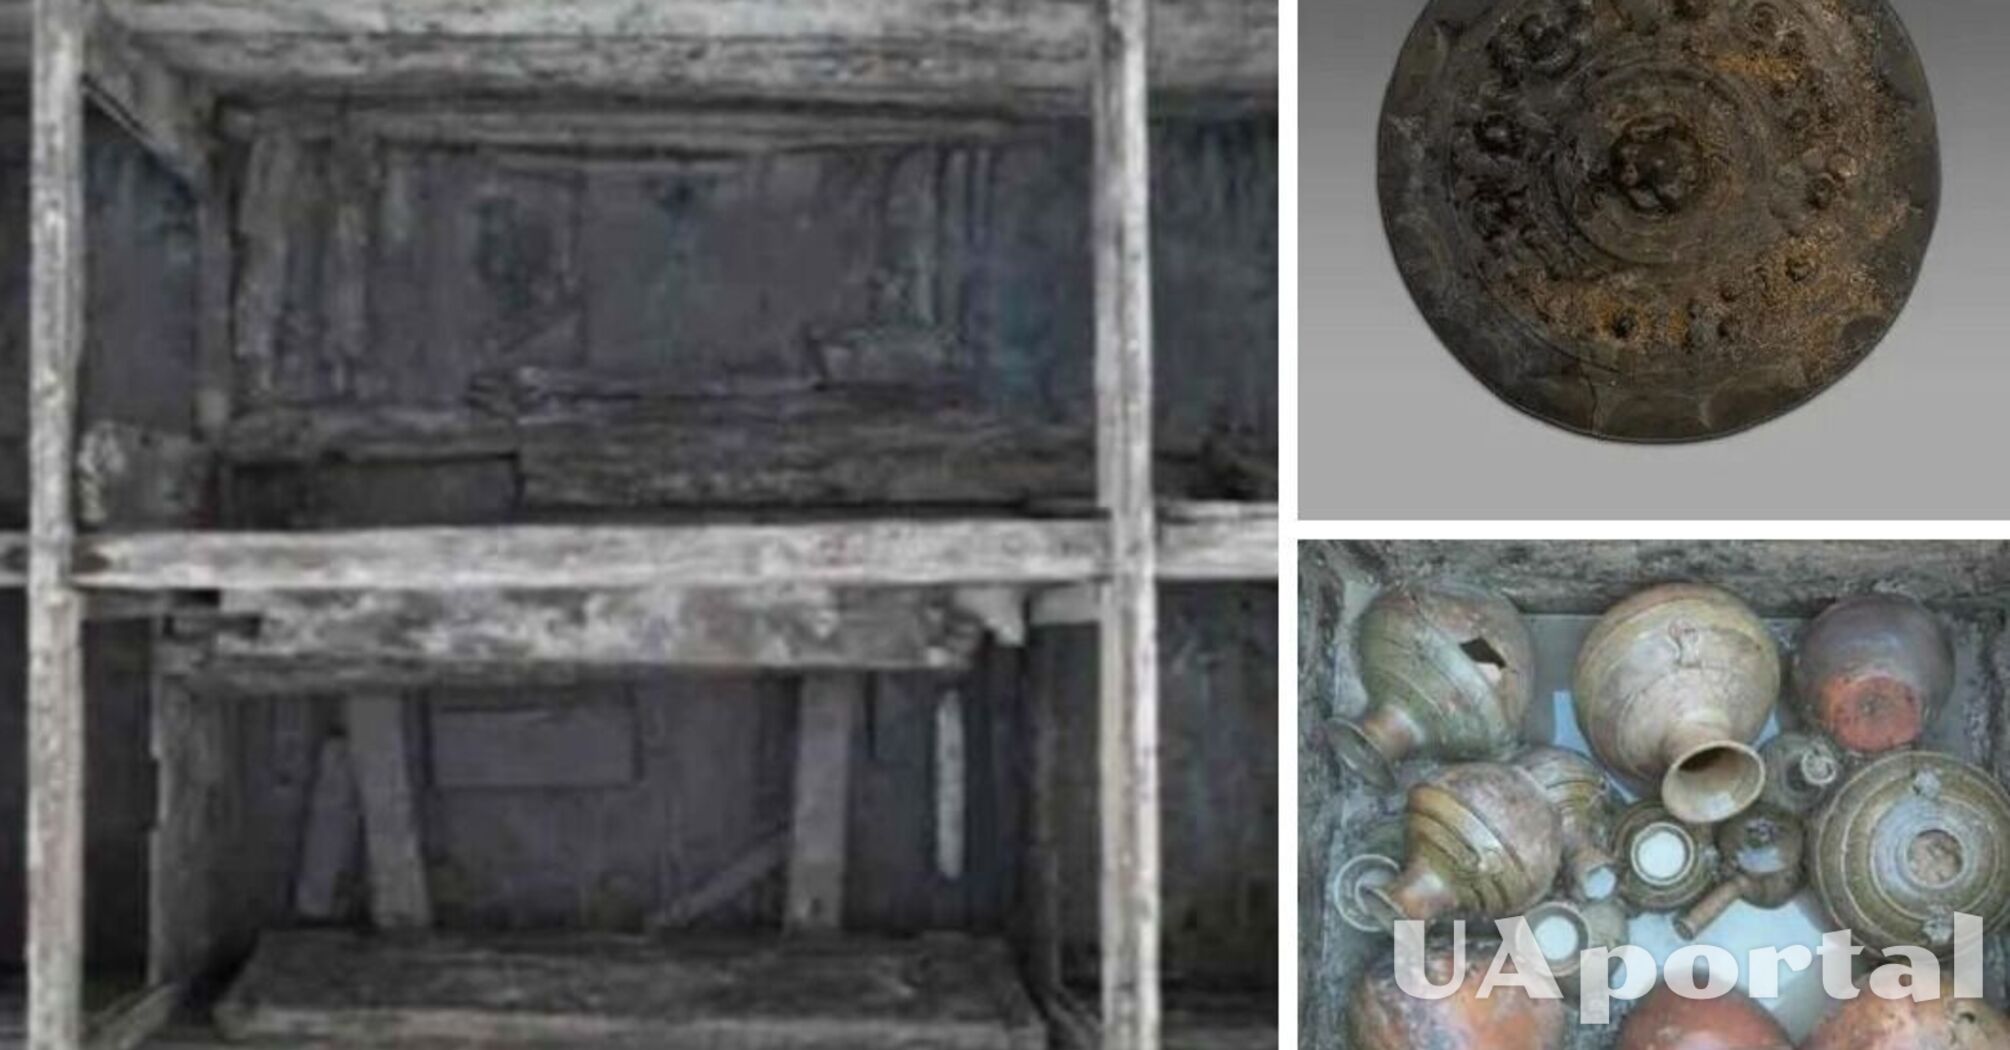 Were filled with treasures: three 1800-year-old tombs of the Han Dynasty were found by archaeologists (photo)